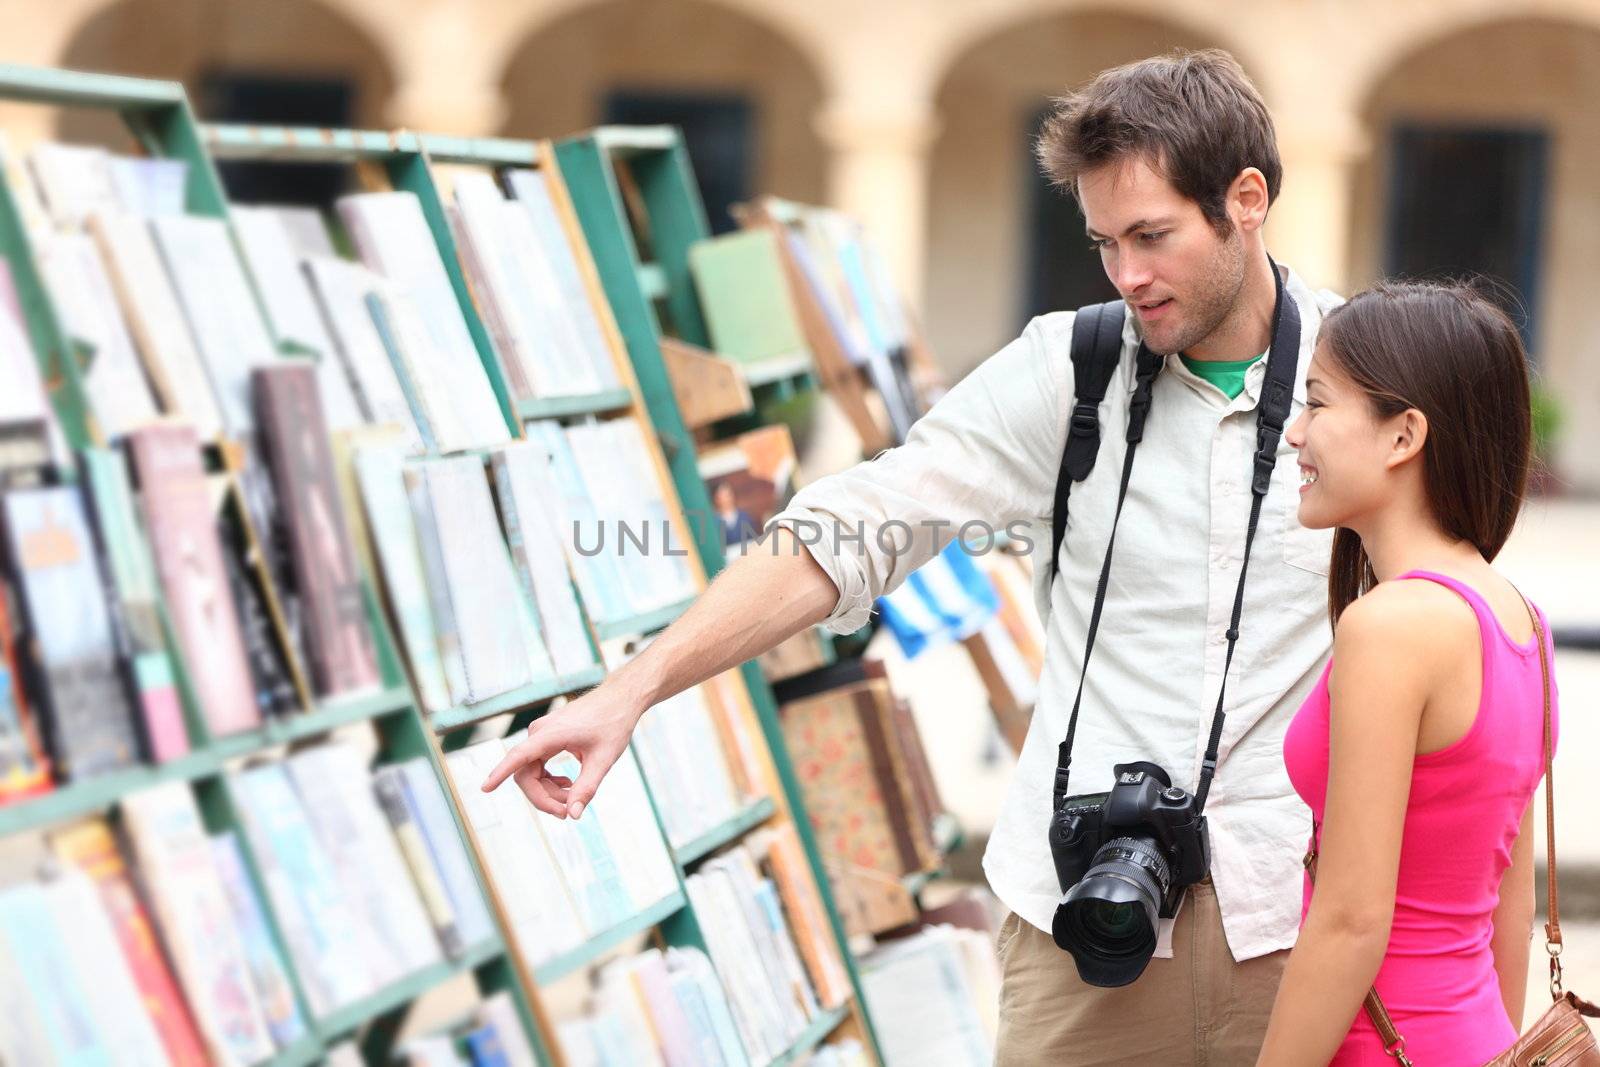 Tourist couple in Havana, Cuba looking at books together having fun on vacation travel on Plaza de Armas in Old Havana. Young travelers interracial couple, Asian woman, Caucasian man.